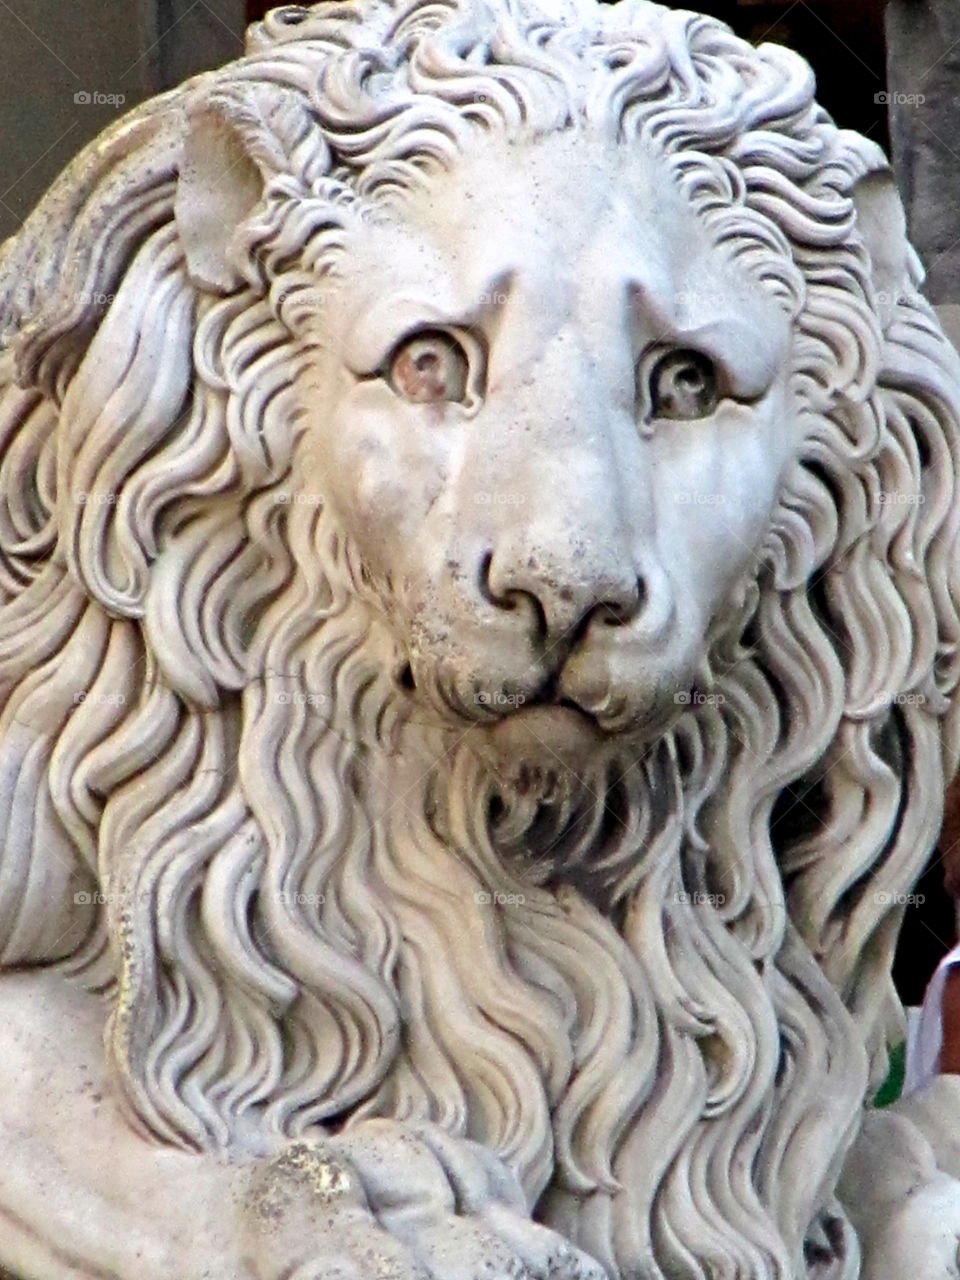 Lion face statue with an intense and  sad look